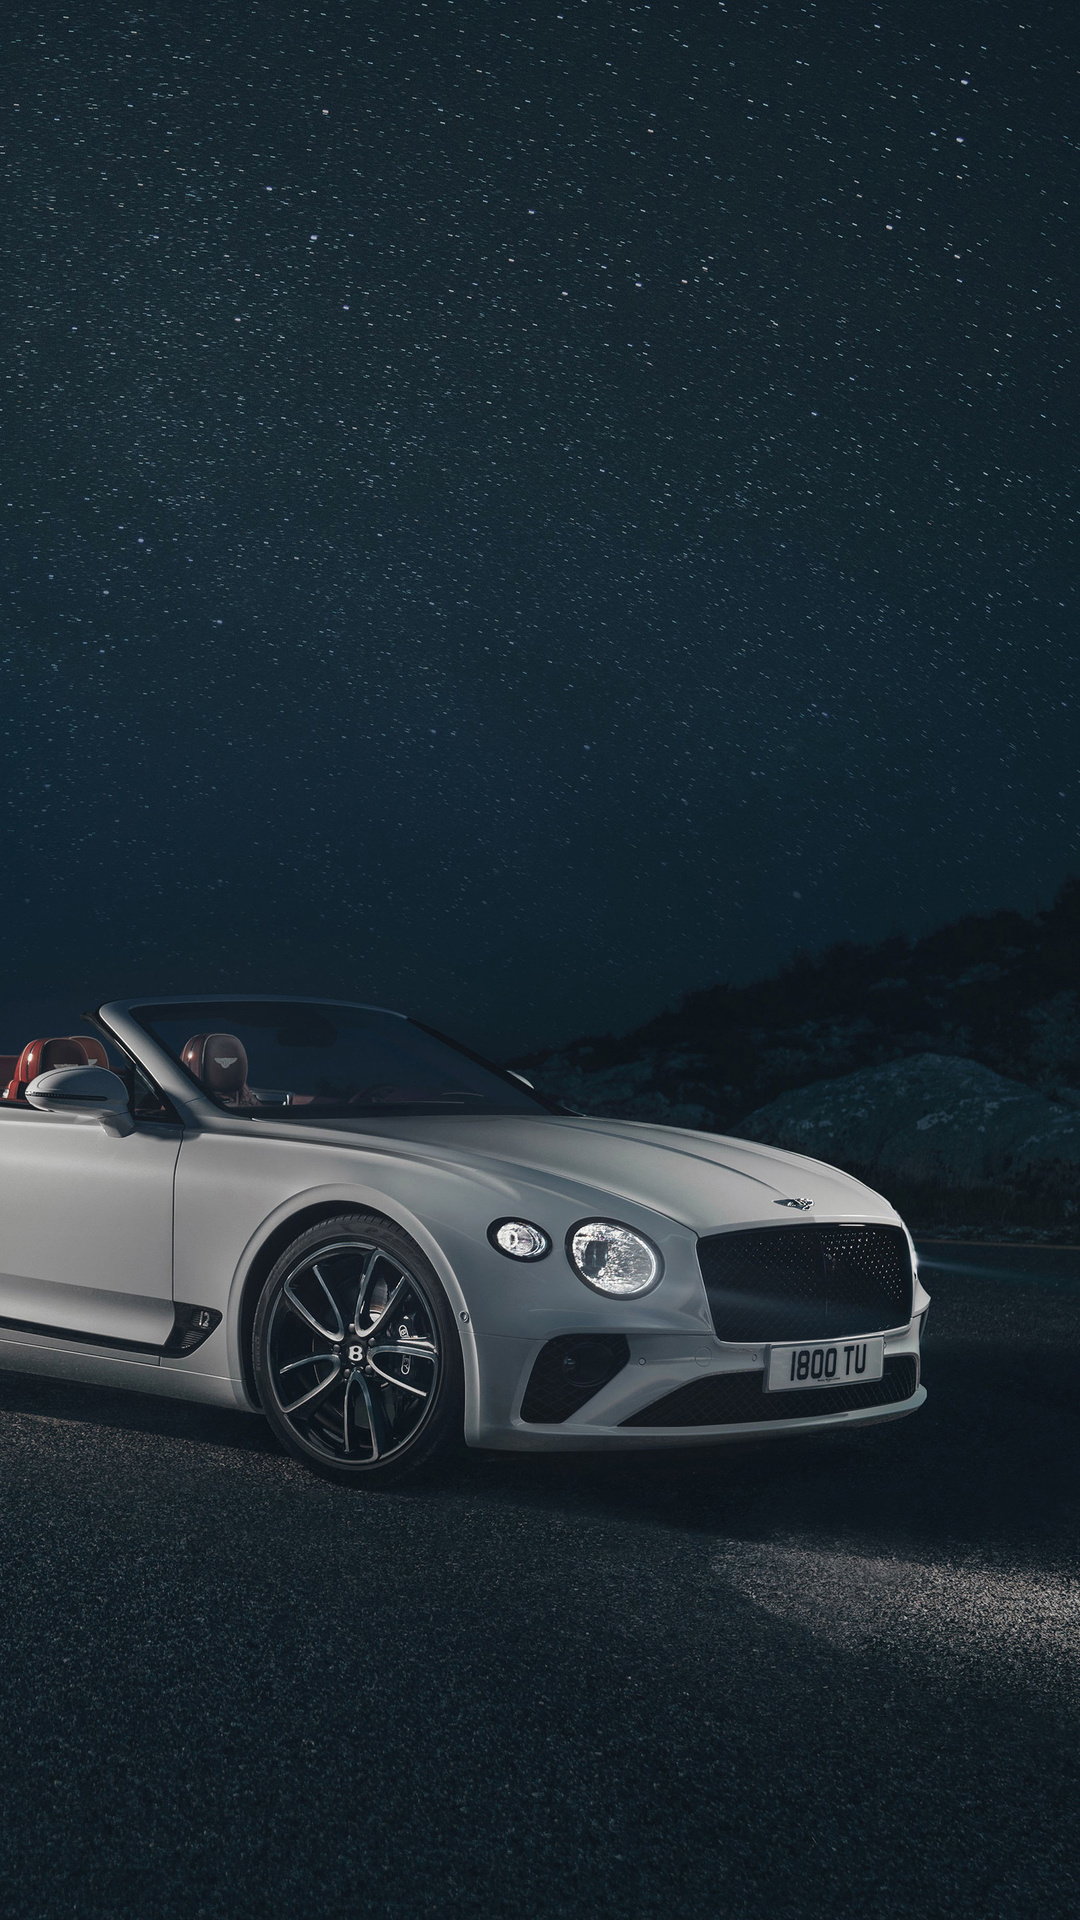 Bentley Continental GTC, iPhone wallpapers, Download luxury car, High-end cars, 1080x1920 Full HD Handy